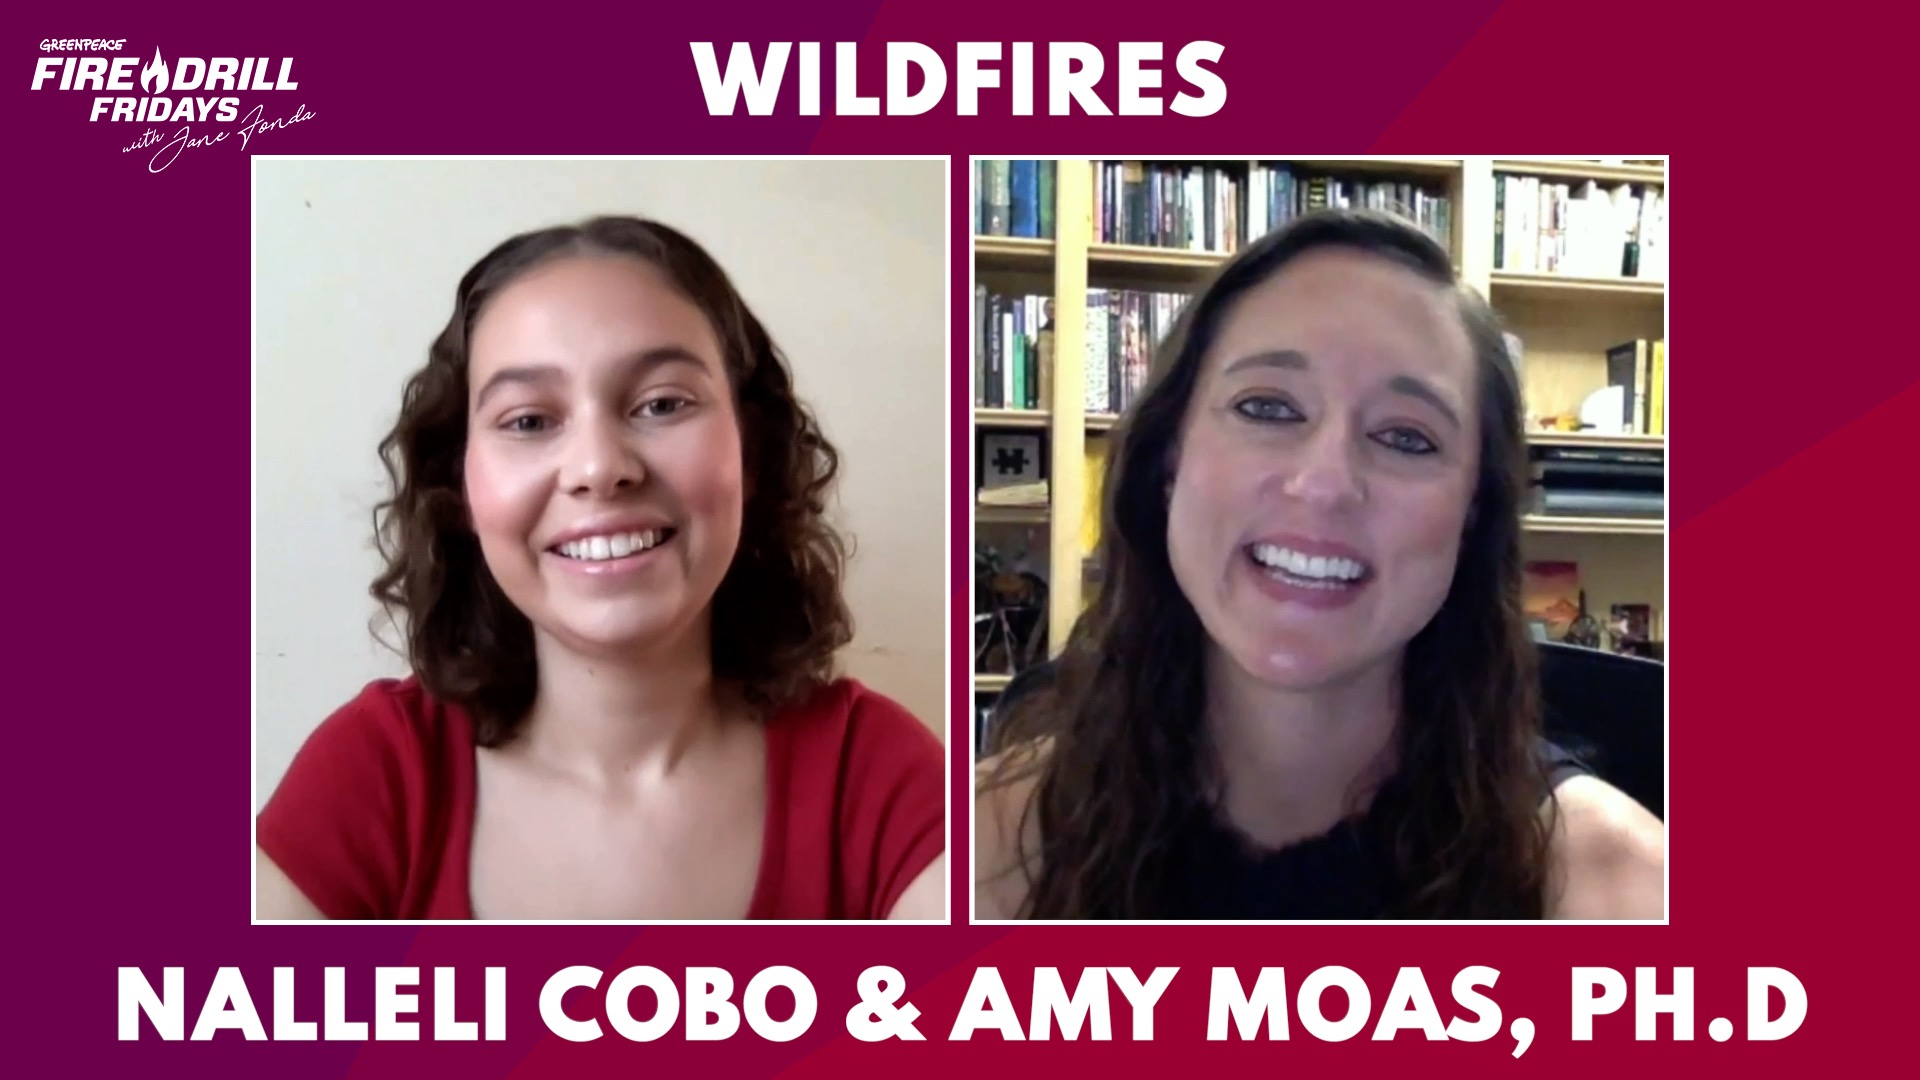 Watch Guest-Host Nalleli Cobo & Amy Moas, Ph.D Discuss Wildfires in California and Climate Chaos